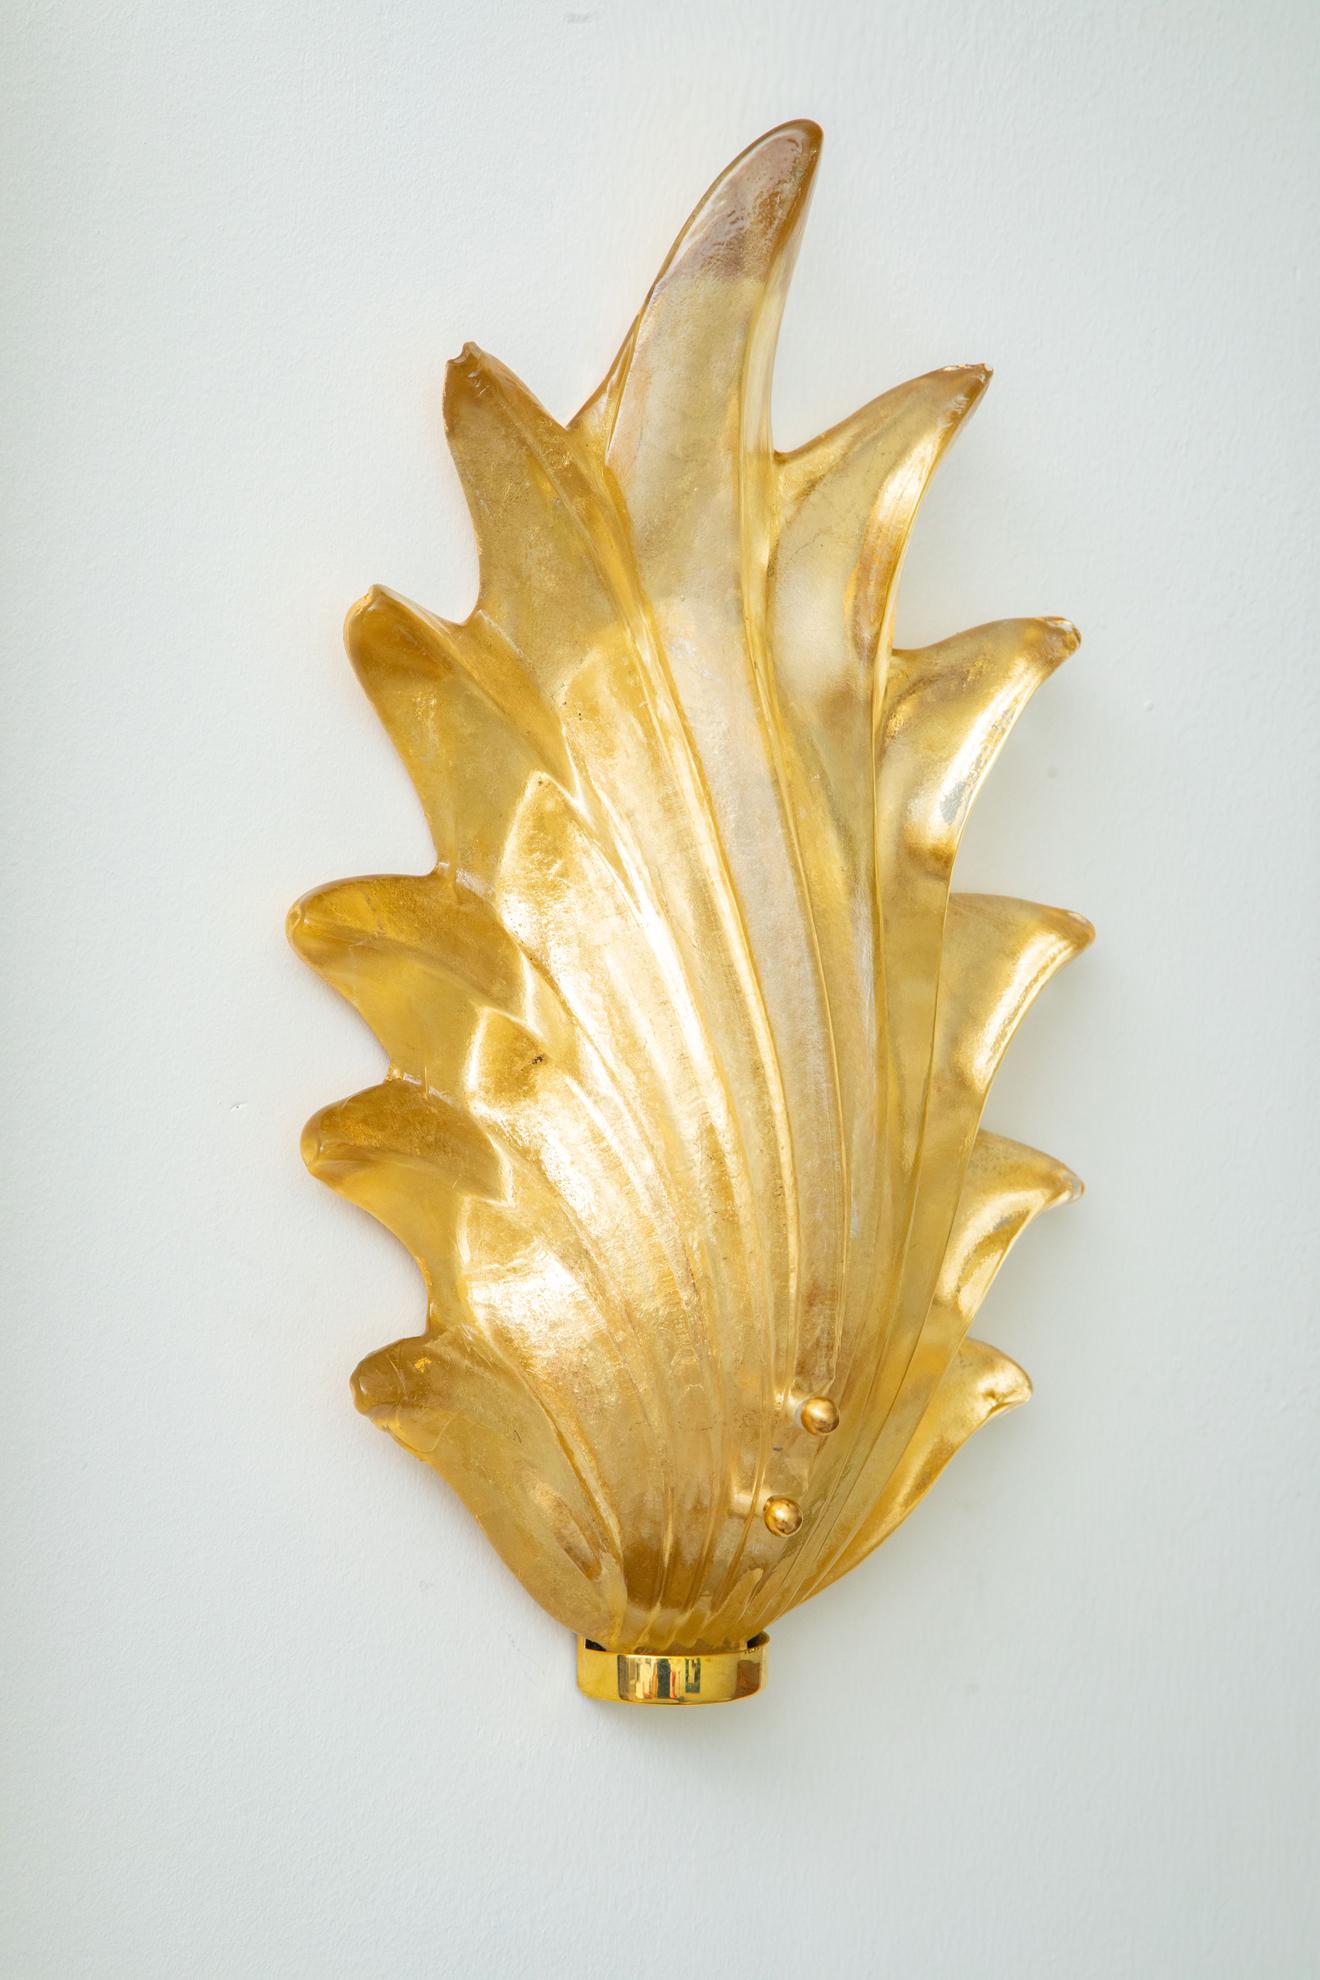 Pair of Murano gilded leaf glass and brass wall lights, in stock
1 G9 LED bulb
Wired to the American standard
Similar pair available in clear and green 
Priced per pair
Available to view in situ in our Miami gallery